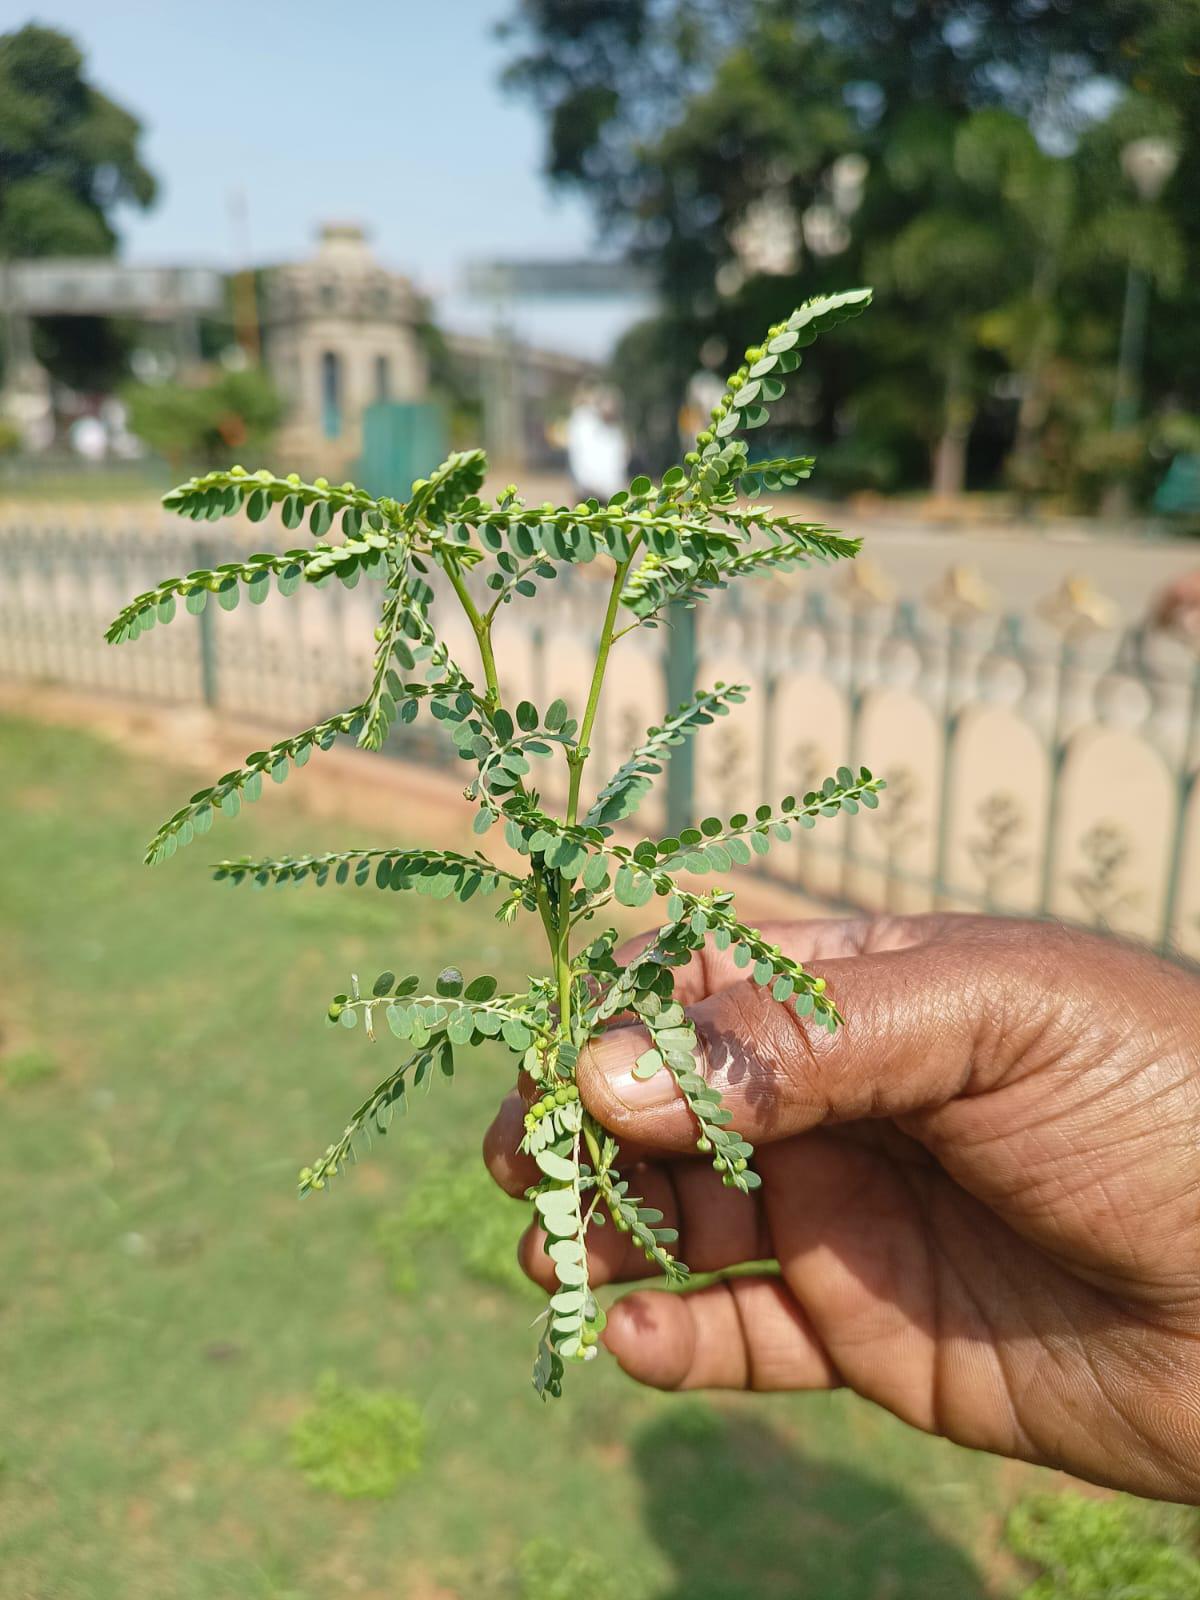 Kirunelli, a medicinal plant found in Lalbagh